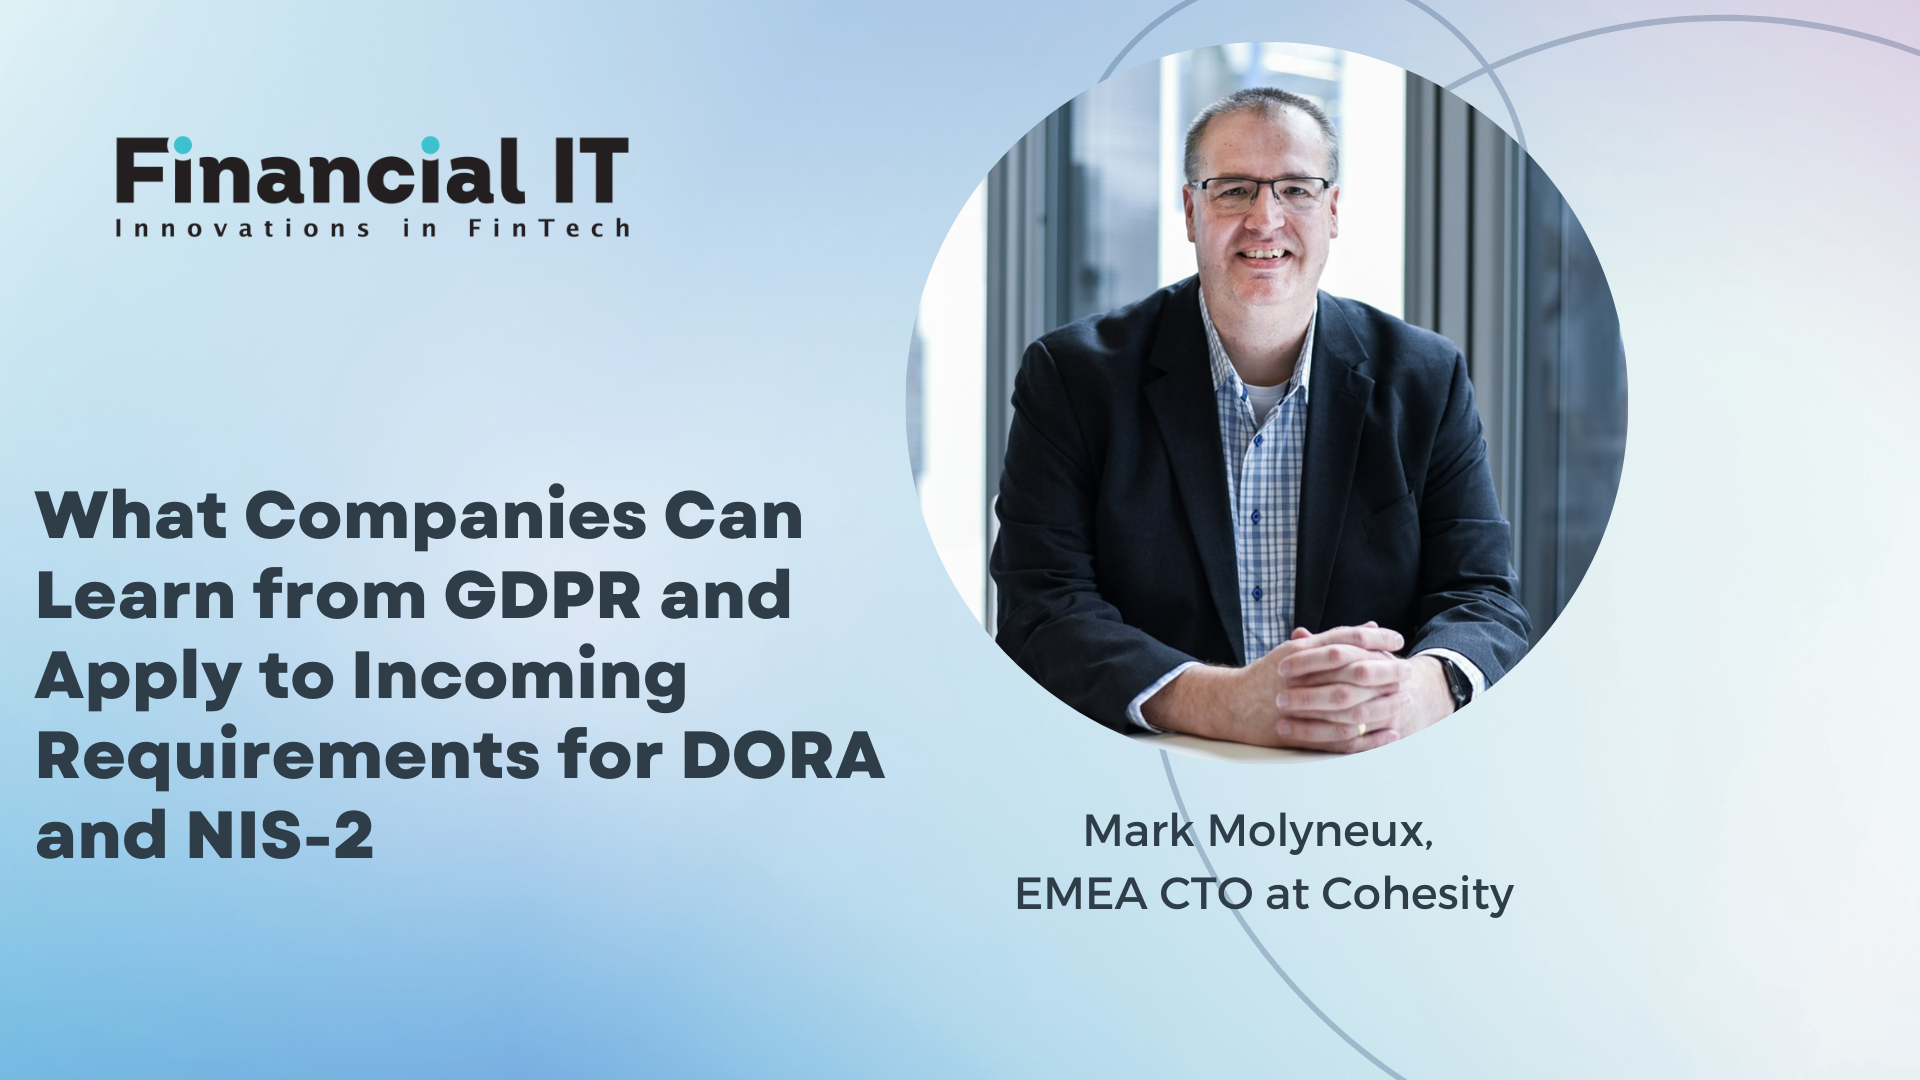 What Companies Can Learn from GDPR and Apply to Incoming Requirements for DORA and NIS-2